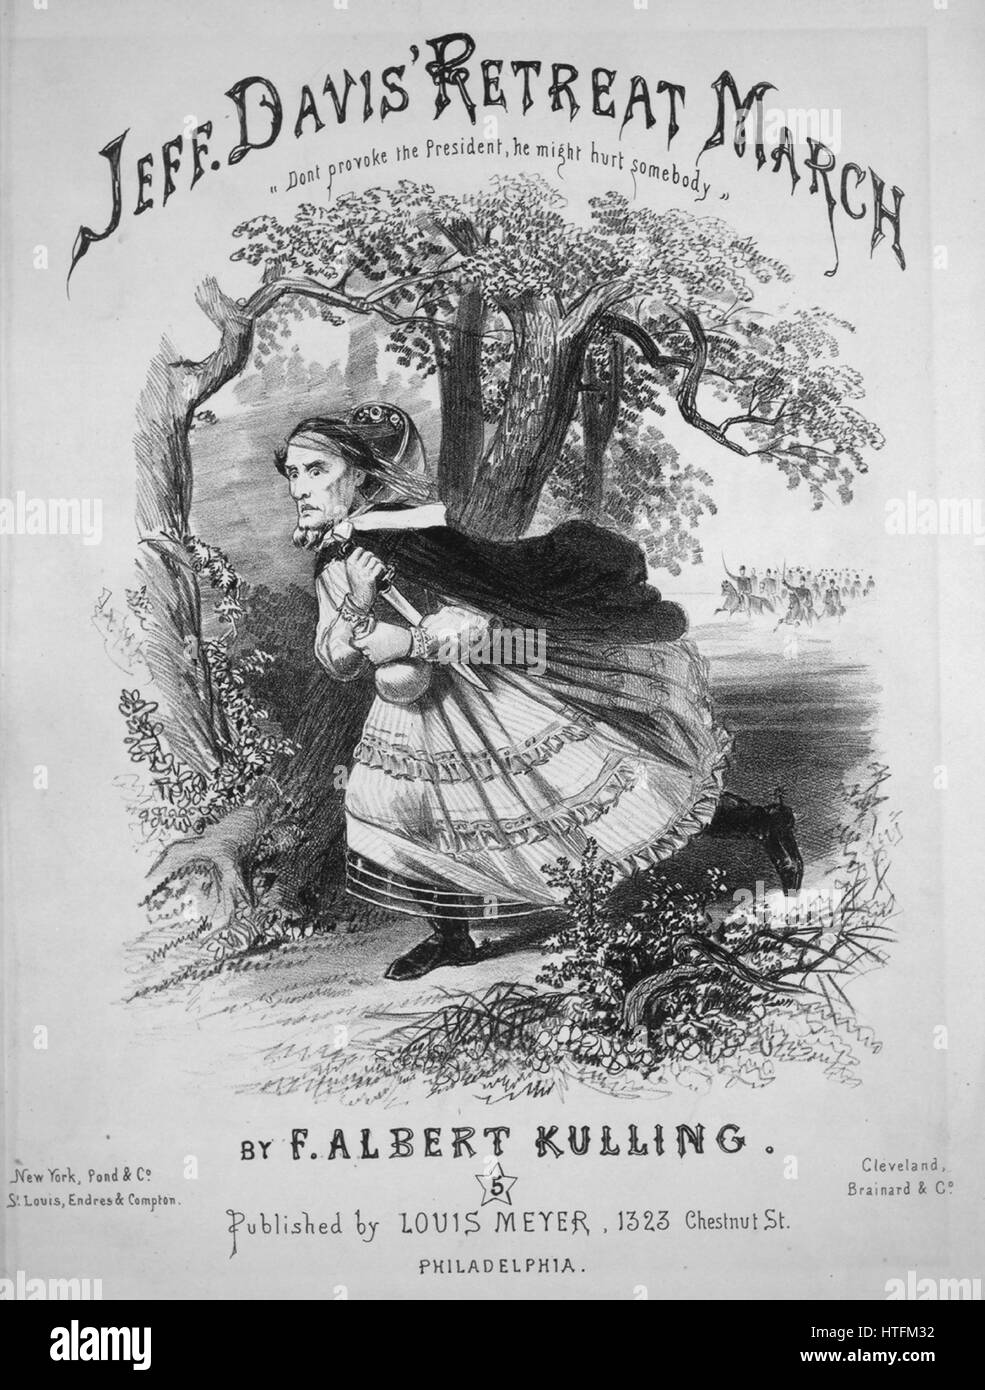 Sheet music cover image of the song 'Jeff Davis Retreat March', with original authorship notes reading 'By F Albert Kulling', United States, 1865. The publisher is listed as 'Louis Meyer, 1323 Chestnut St.', the form of composition is 'da capo', the instrumentation is 'piano', the first line reads 'None', and the illustration artist is listed as 'None'. Stock Photo